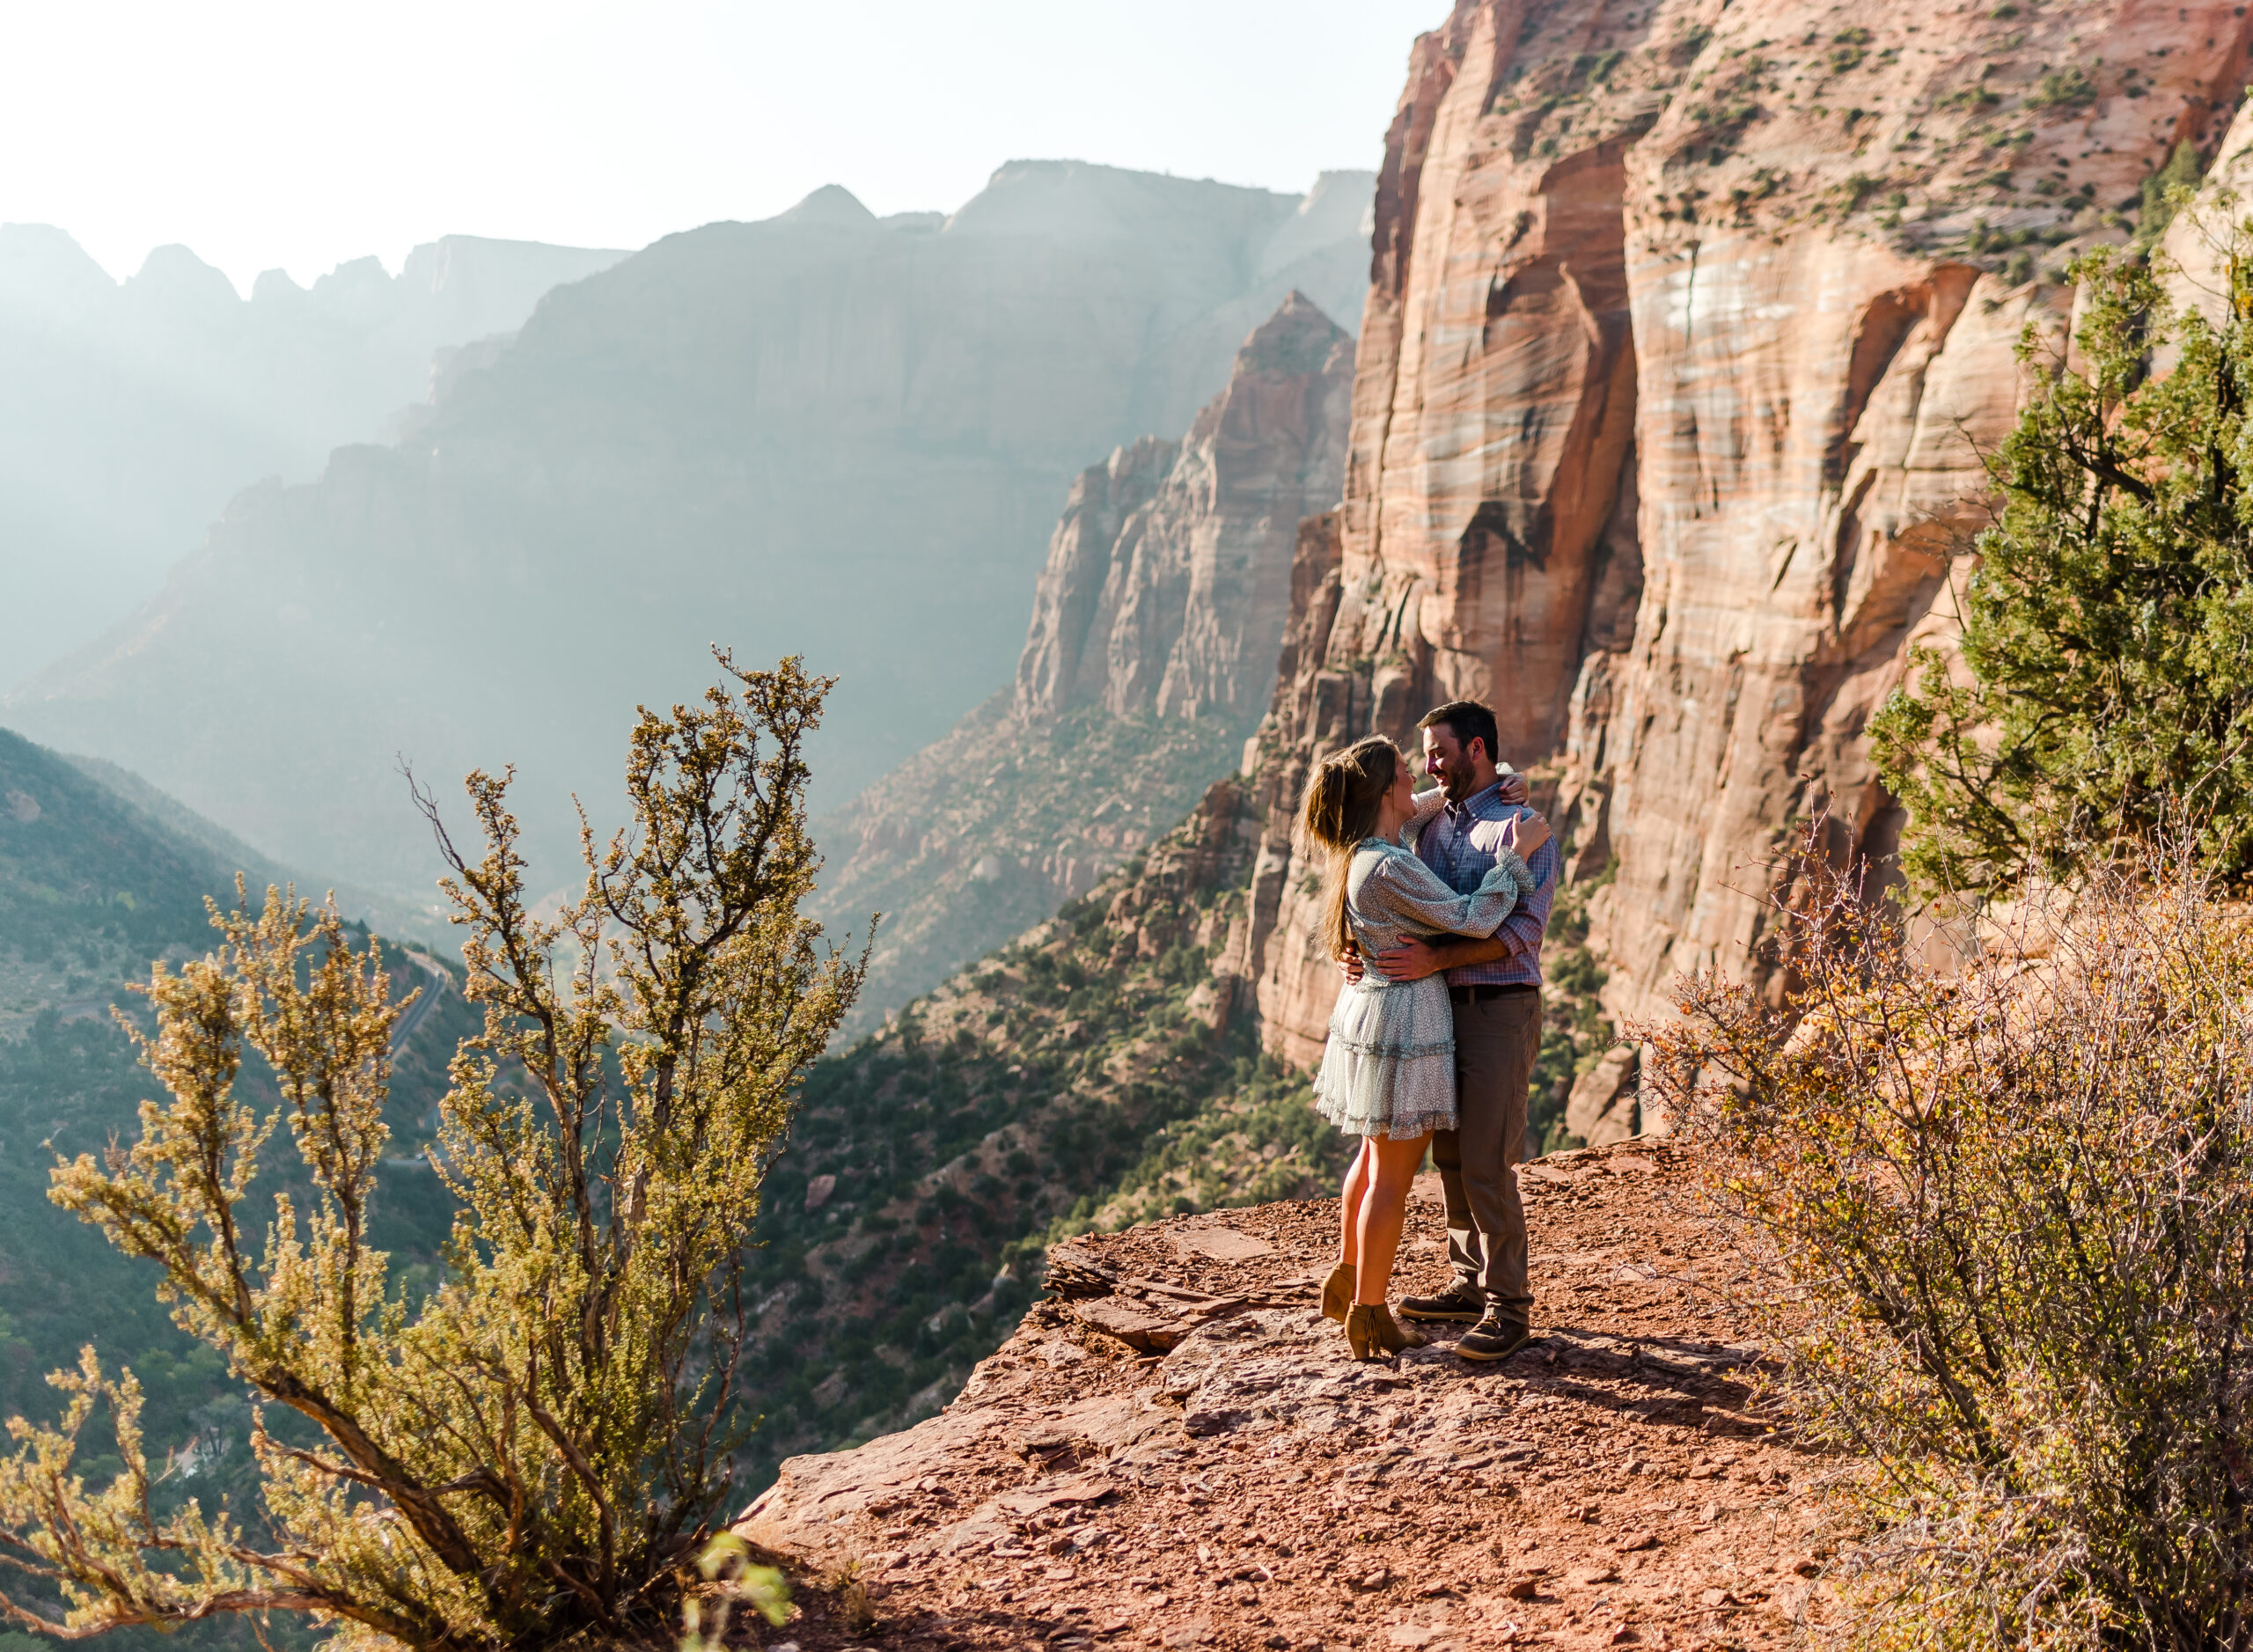 Man and woman embrace on the edge of a cliff at Zion National Park in Utah